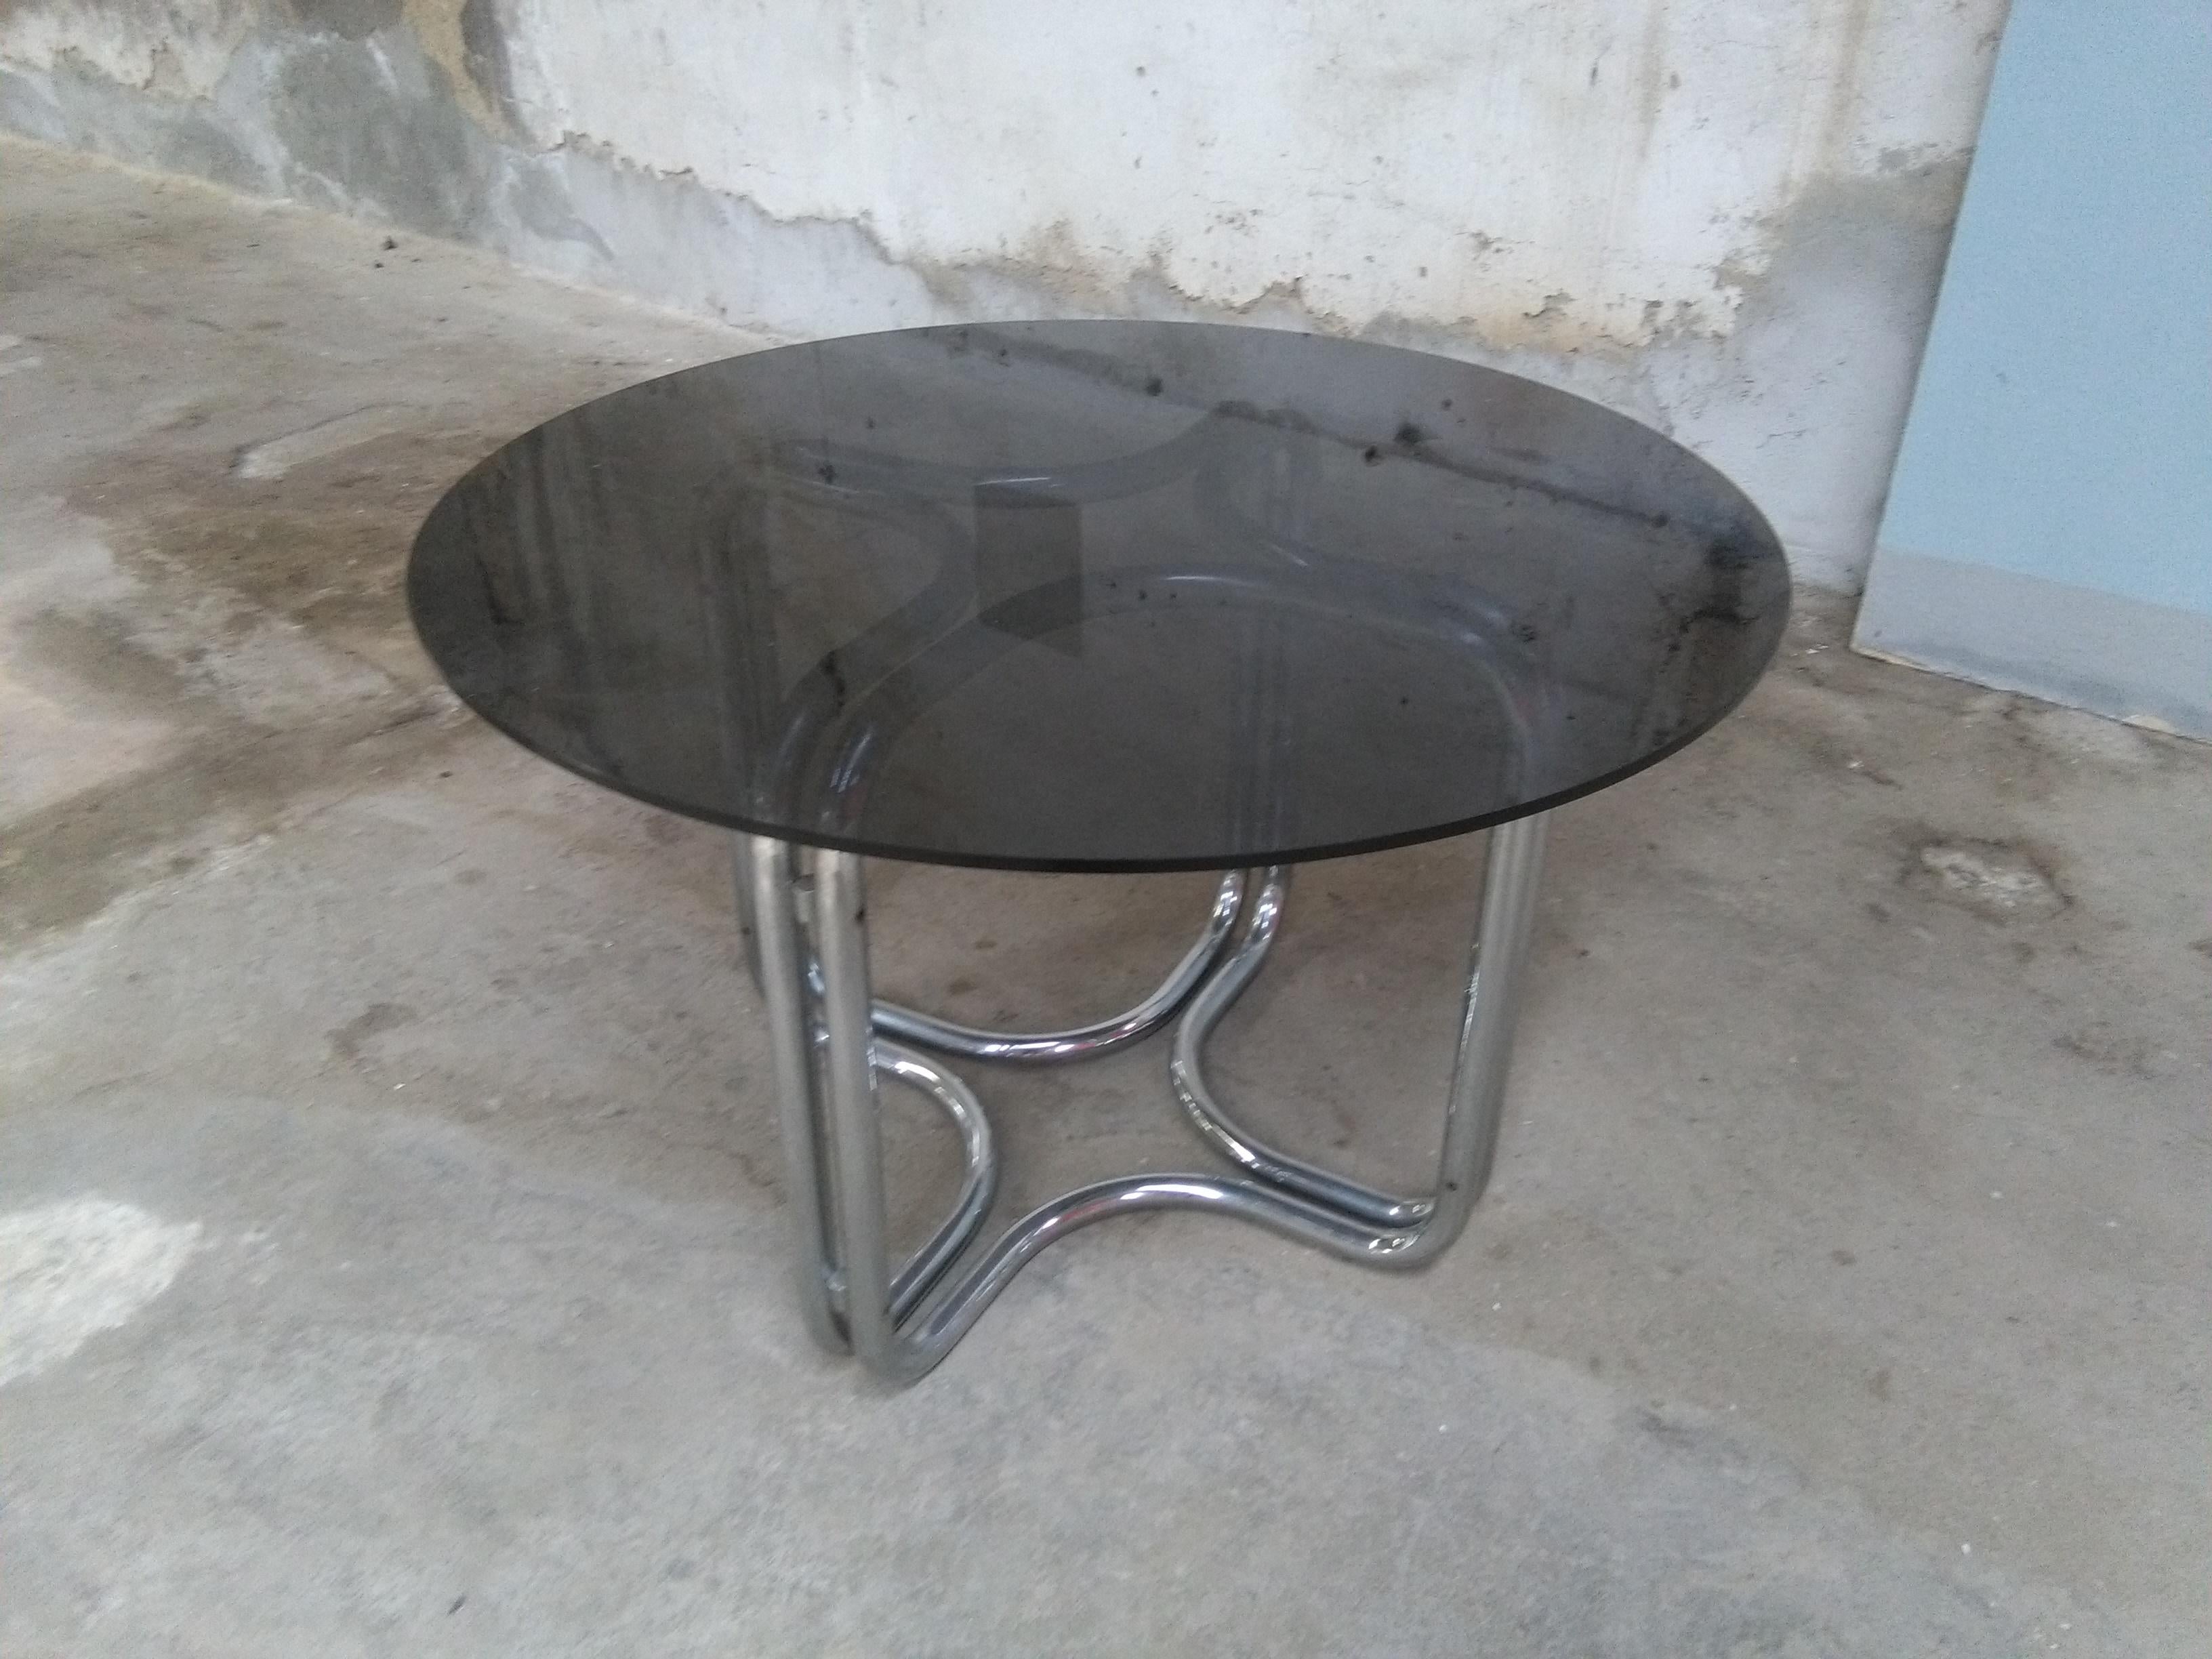 Mid-Century Modern Italian chrome round dining or center table with smoked glass top by Giotto Stoppino.
The table is in very good vintage conditions. Wear depends on age and use.